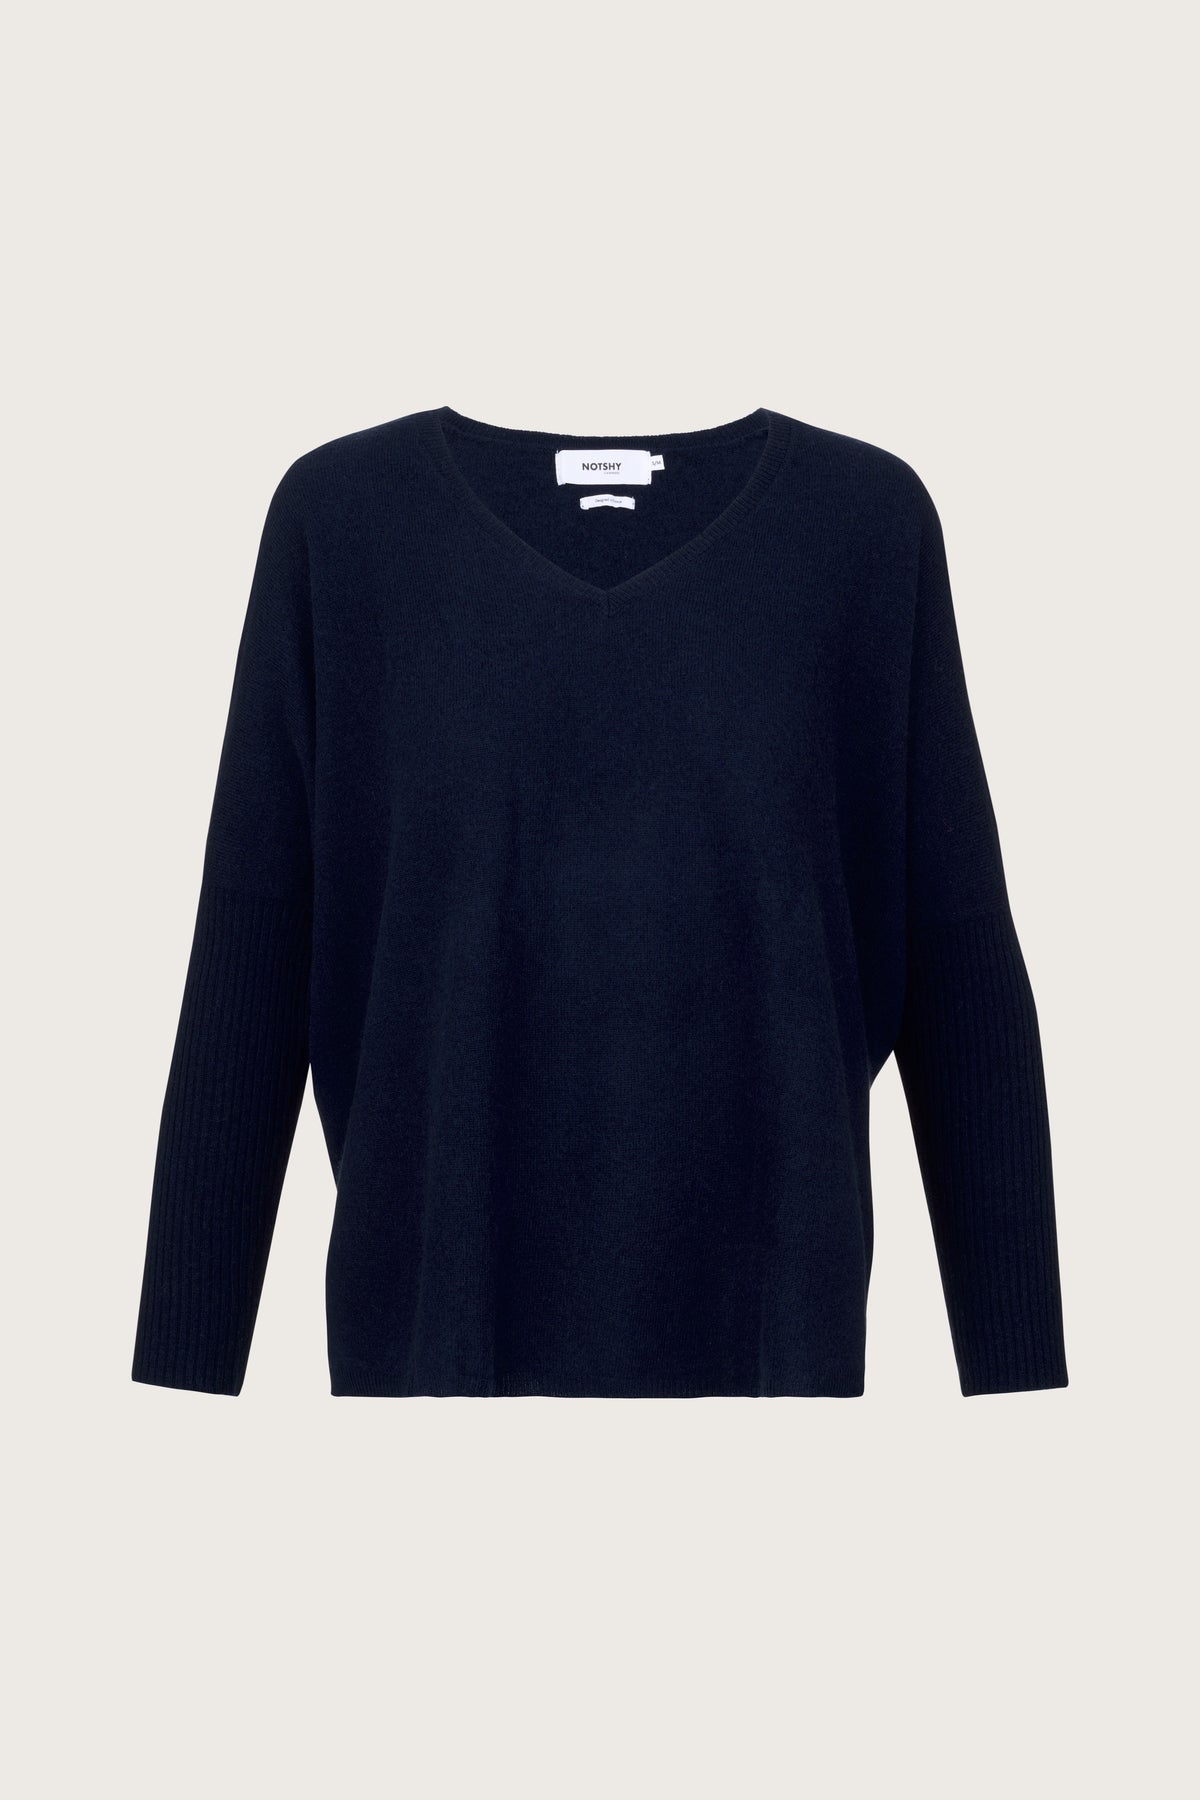 V neck navy cashmere jumper with ribbed sleeves